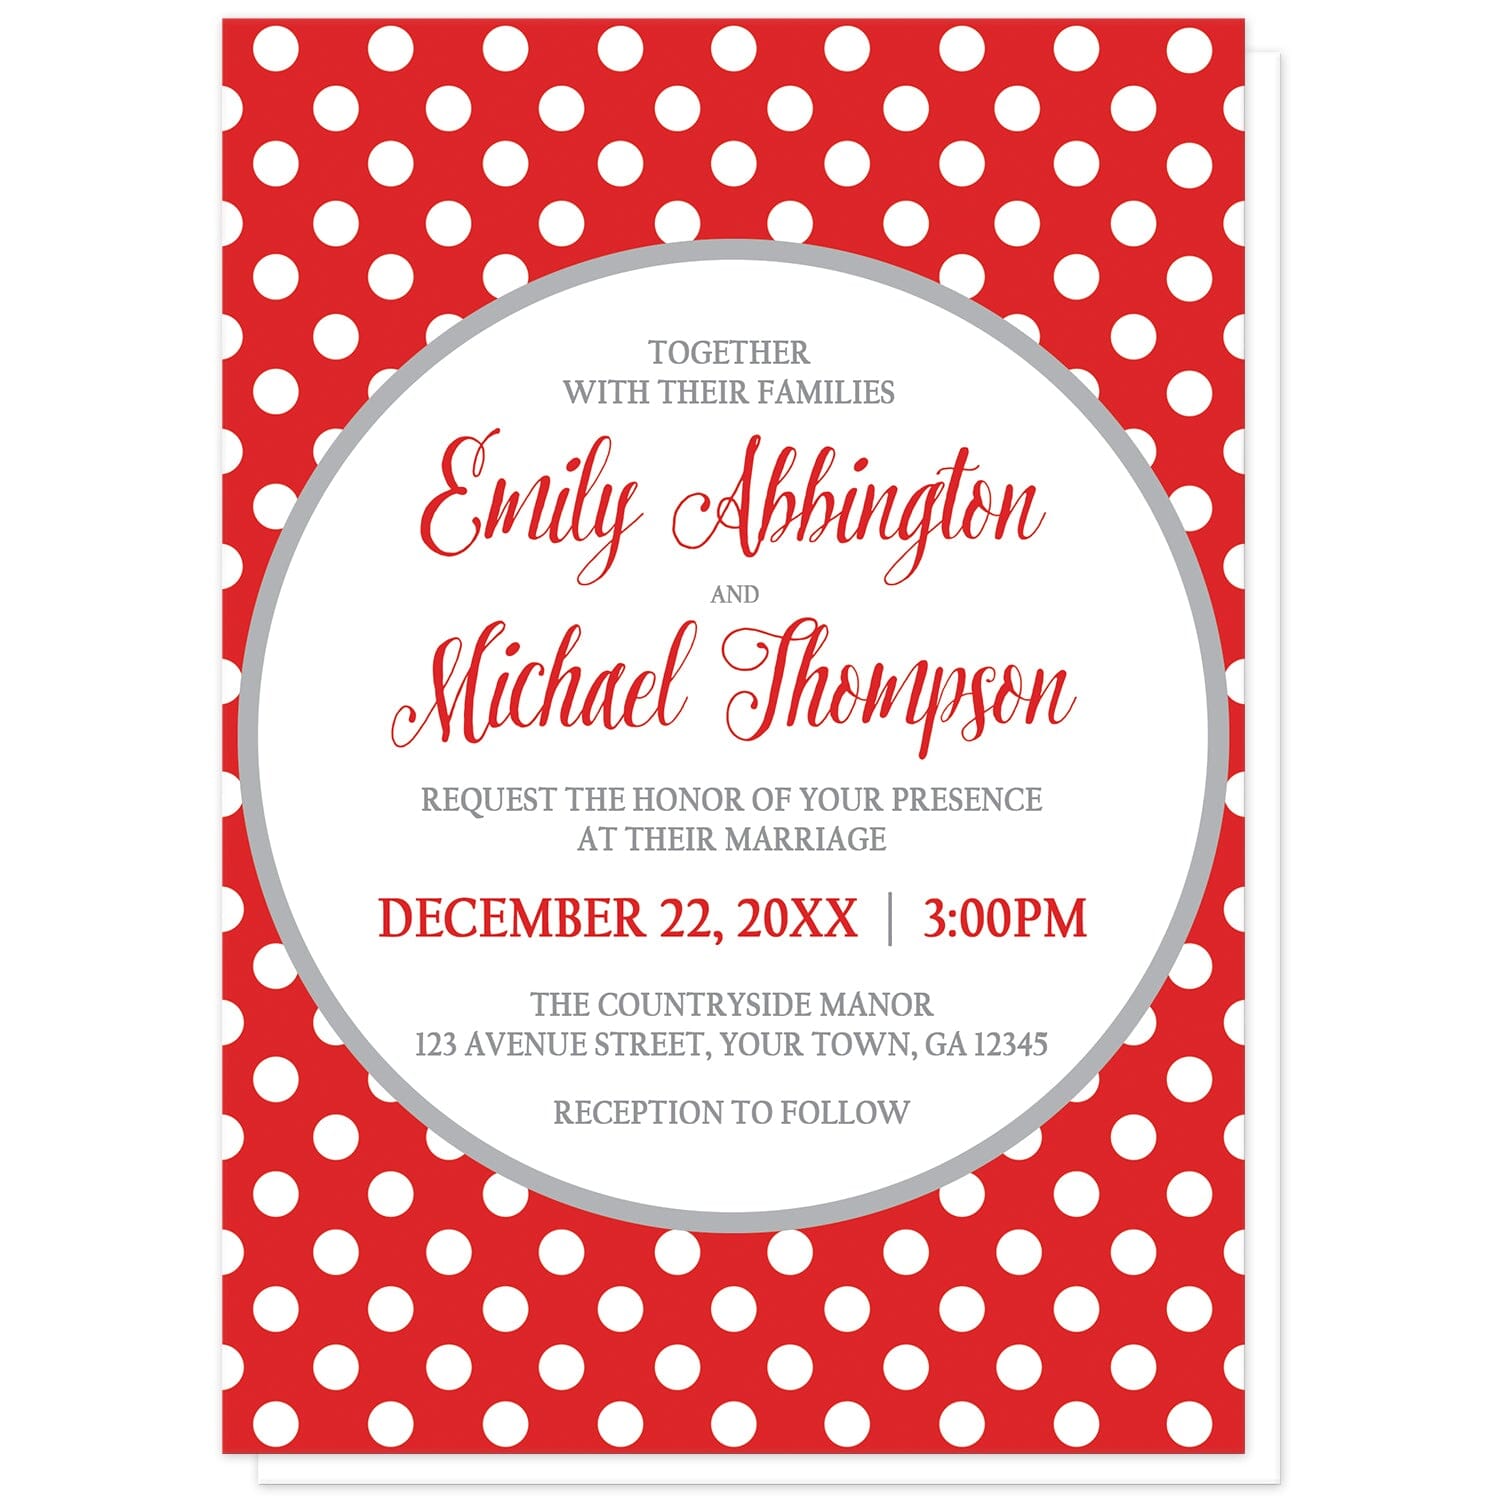 Gray and Red Polka Dot Wedding Invitations at Artistically Invited. Gray and red polka dot wedding invitations with your personalized marriage celebration details custom printed in red and gray inside a white circle outlined in light gray, over a red polka dot pattern with white polka dots over red.